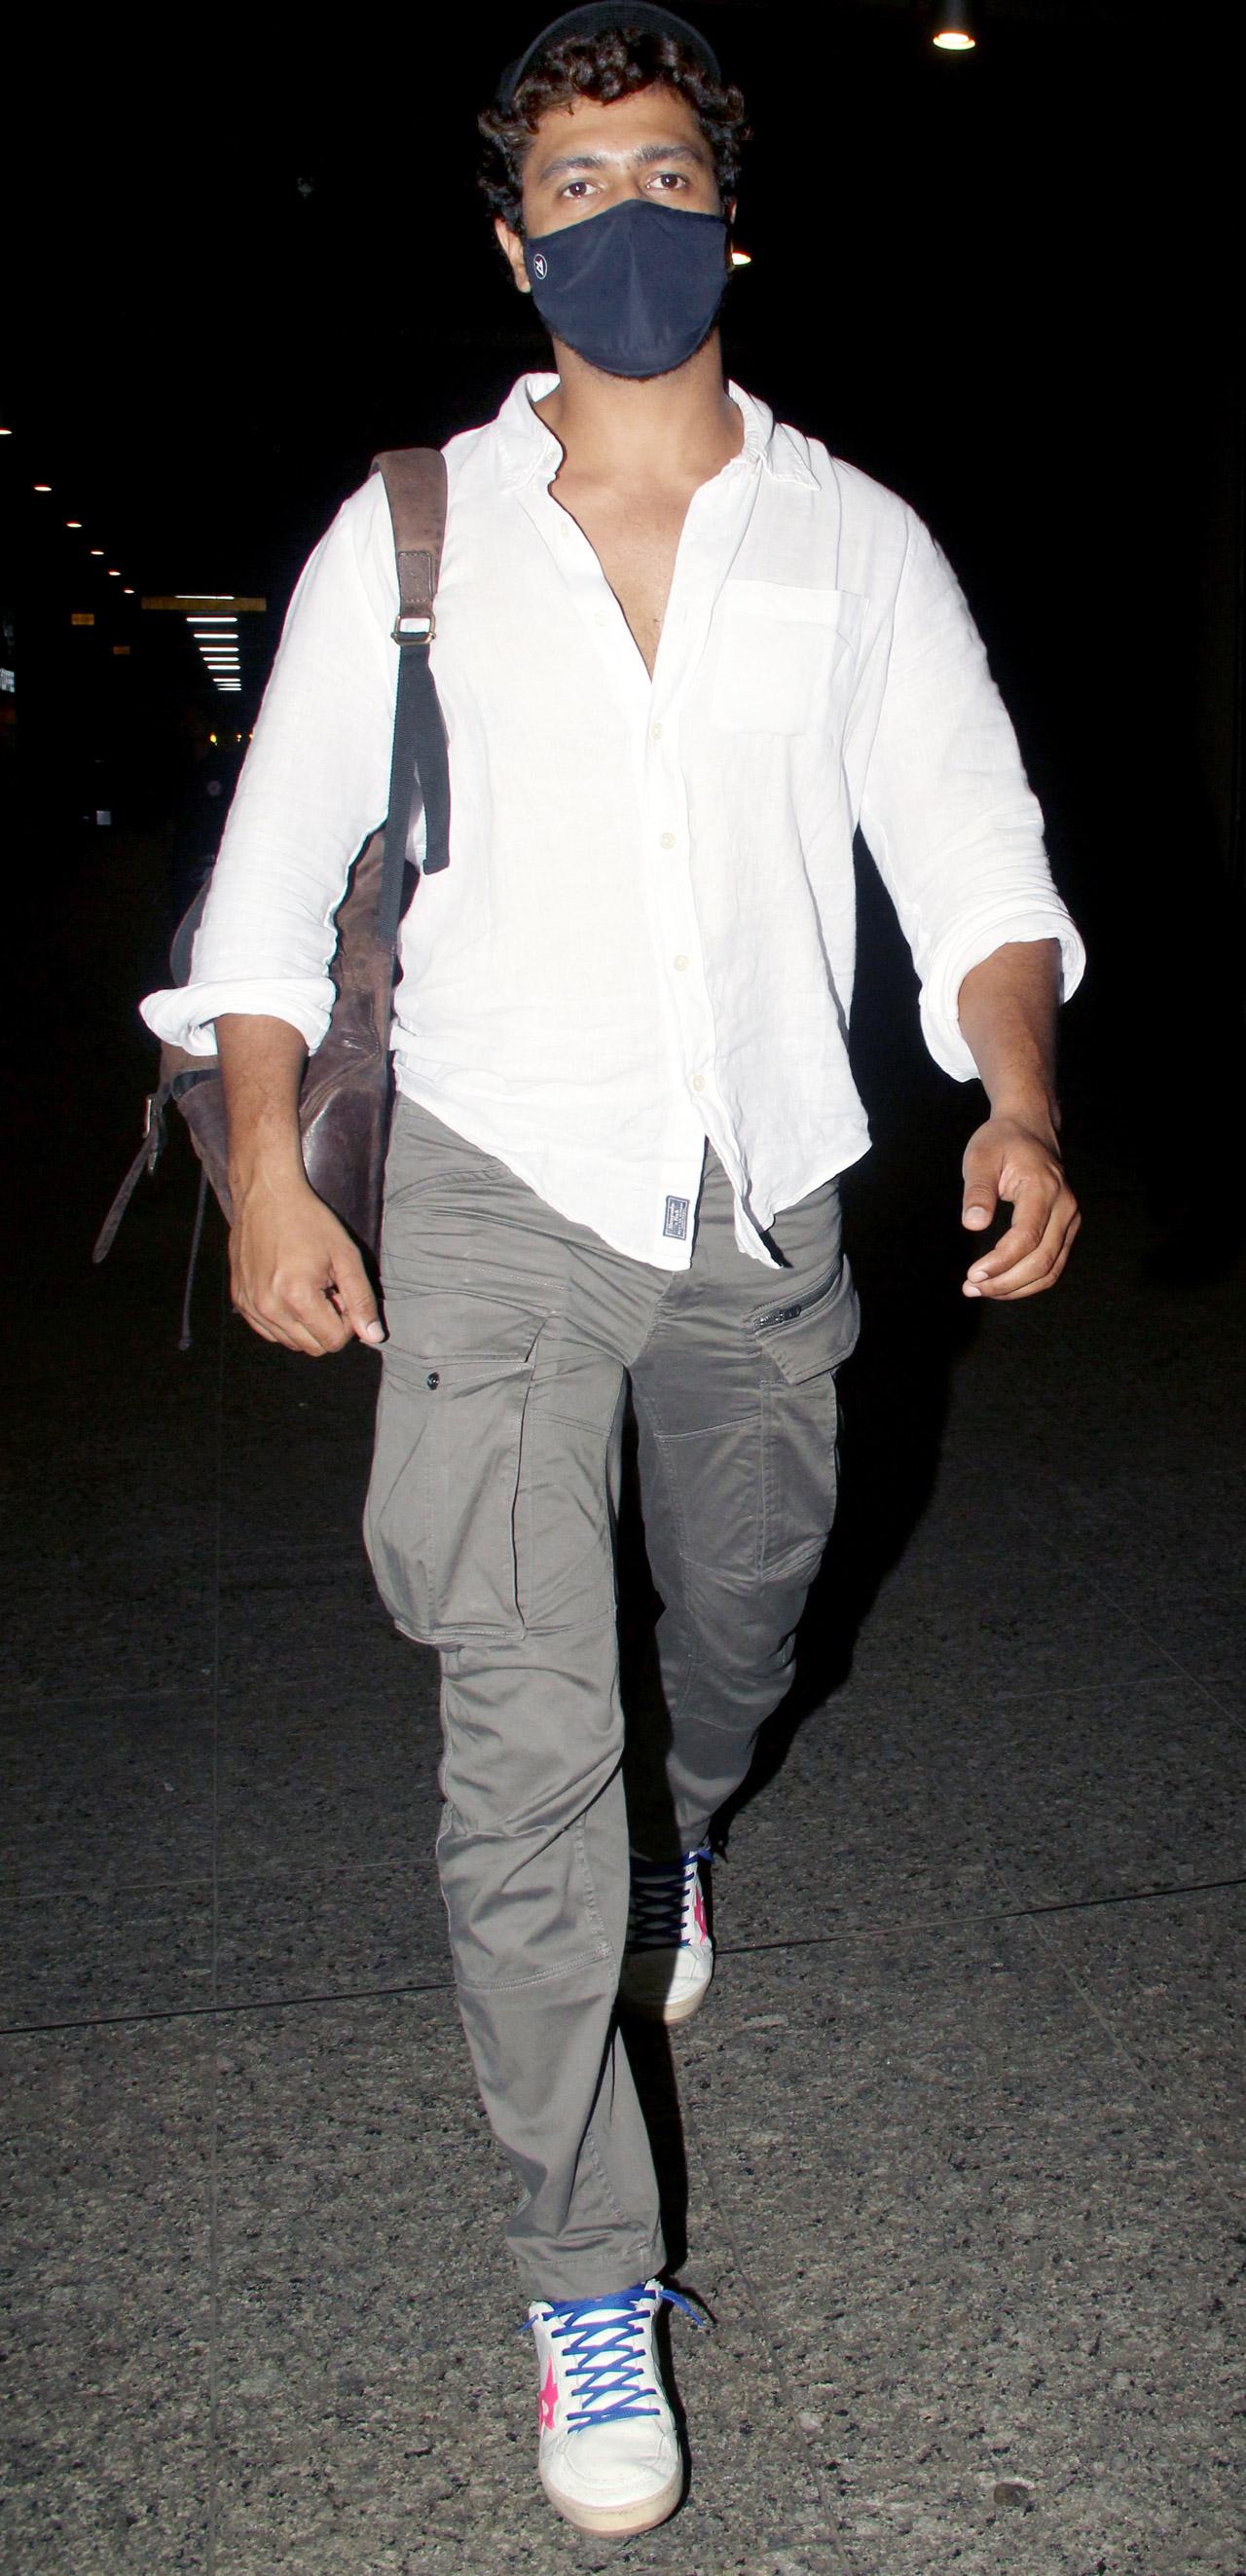 Vicky Kaushal kept it casual as he arrived at the Mumbai airport.